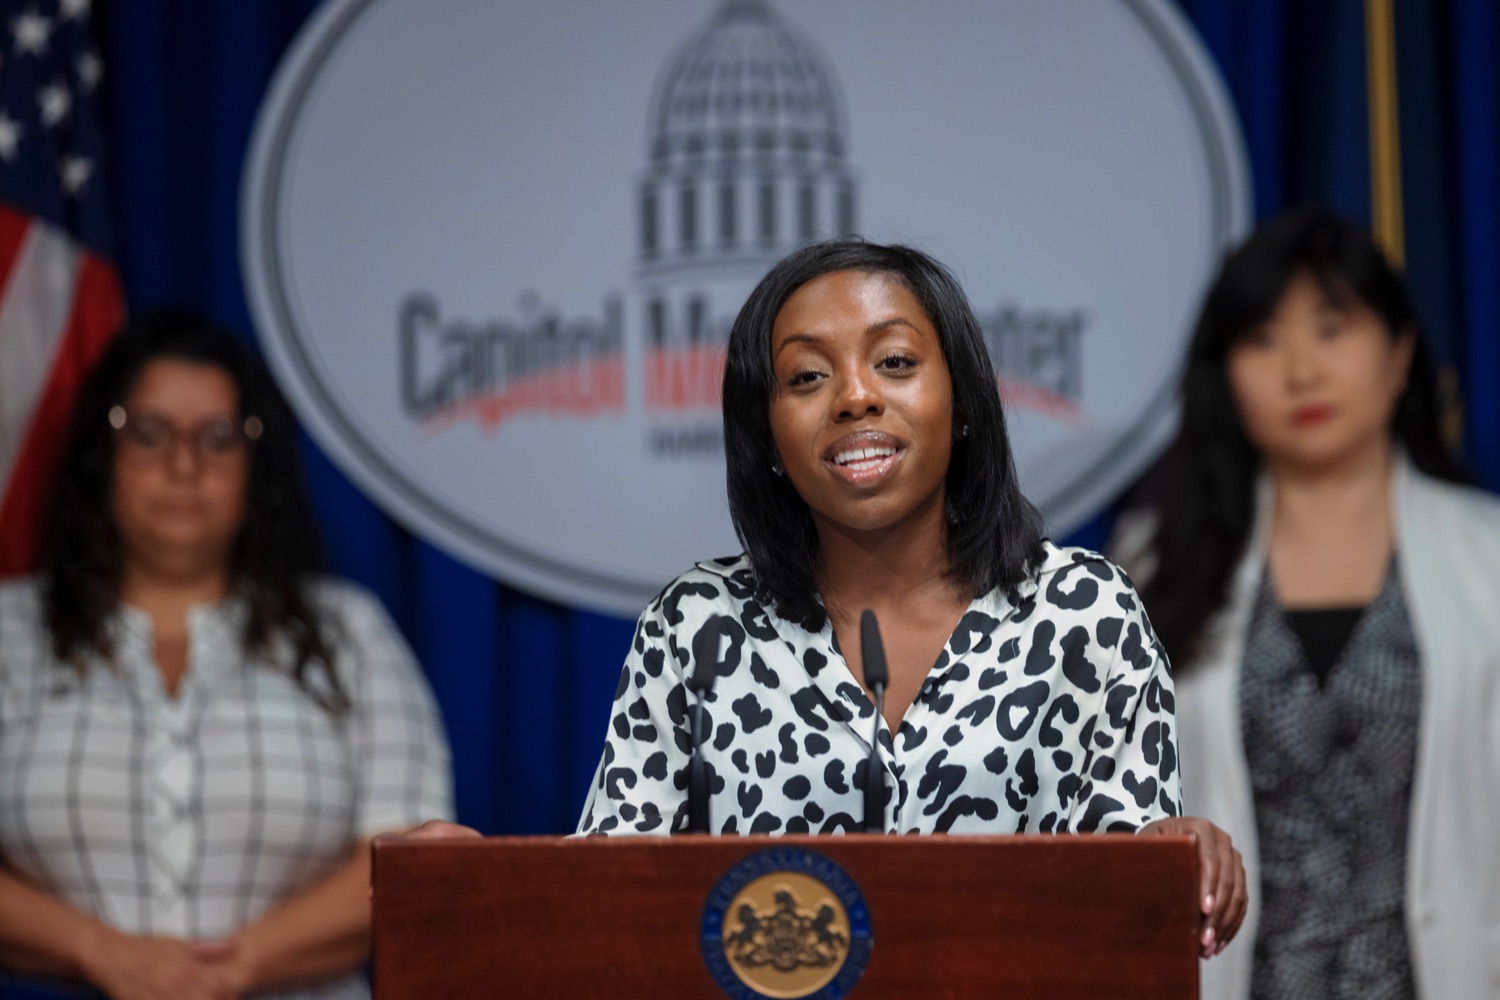 LaDeshia Maxwell, executive director of the Commission on African American Affairs, speaks during a press conference, which highlighted the Wolf Administrations efforts to expand voter access, inside the Capitol Media Center on Tuesday, September 13, 2022. The press conference reminded Pennsylvanians Oct 24. is the deadline to register to vote in the November election. Whether a voter is requesting a no-excuse mail-in ballot from the comfort of their home or showing up to the polls on Election Day and proudly wearing an I voted sticker, voting is a constitutional right and a way for people to make their voice heard, Acting Secretary of State Leigh M. Chapman said. I am honored to be part of an administration that continues to work hard so everyone has equal access to the ballot box. .<br><a href="https://filesource.amperwave.net/commonwealthofpa/photo/22138_CFW_VotingPA_NK_008.JPG" target="_blank">⇣ Download Photo</a>